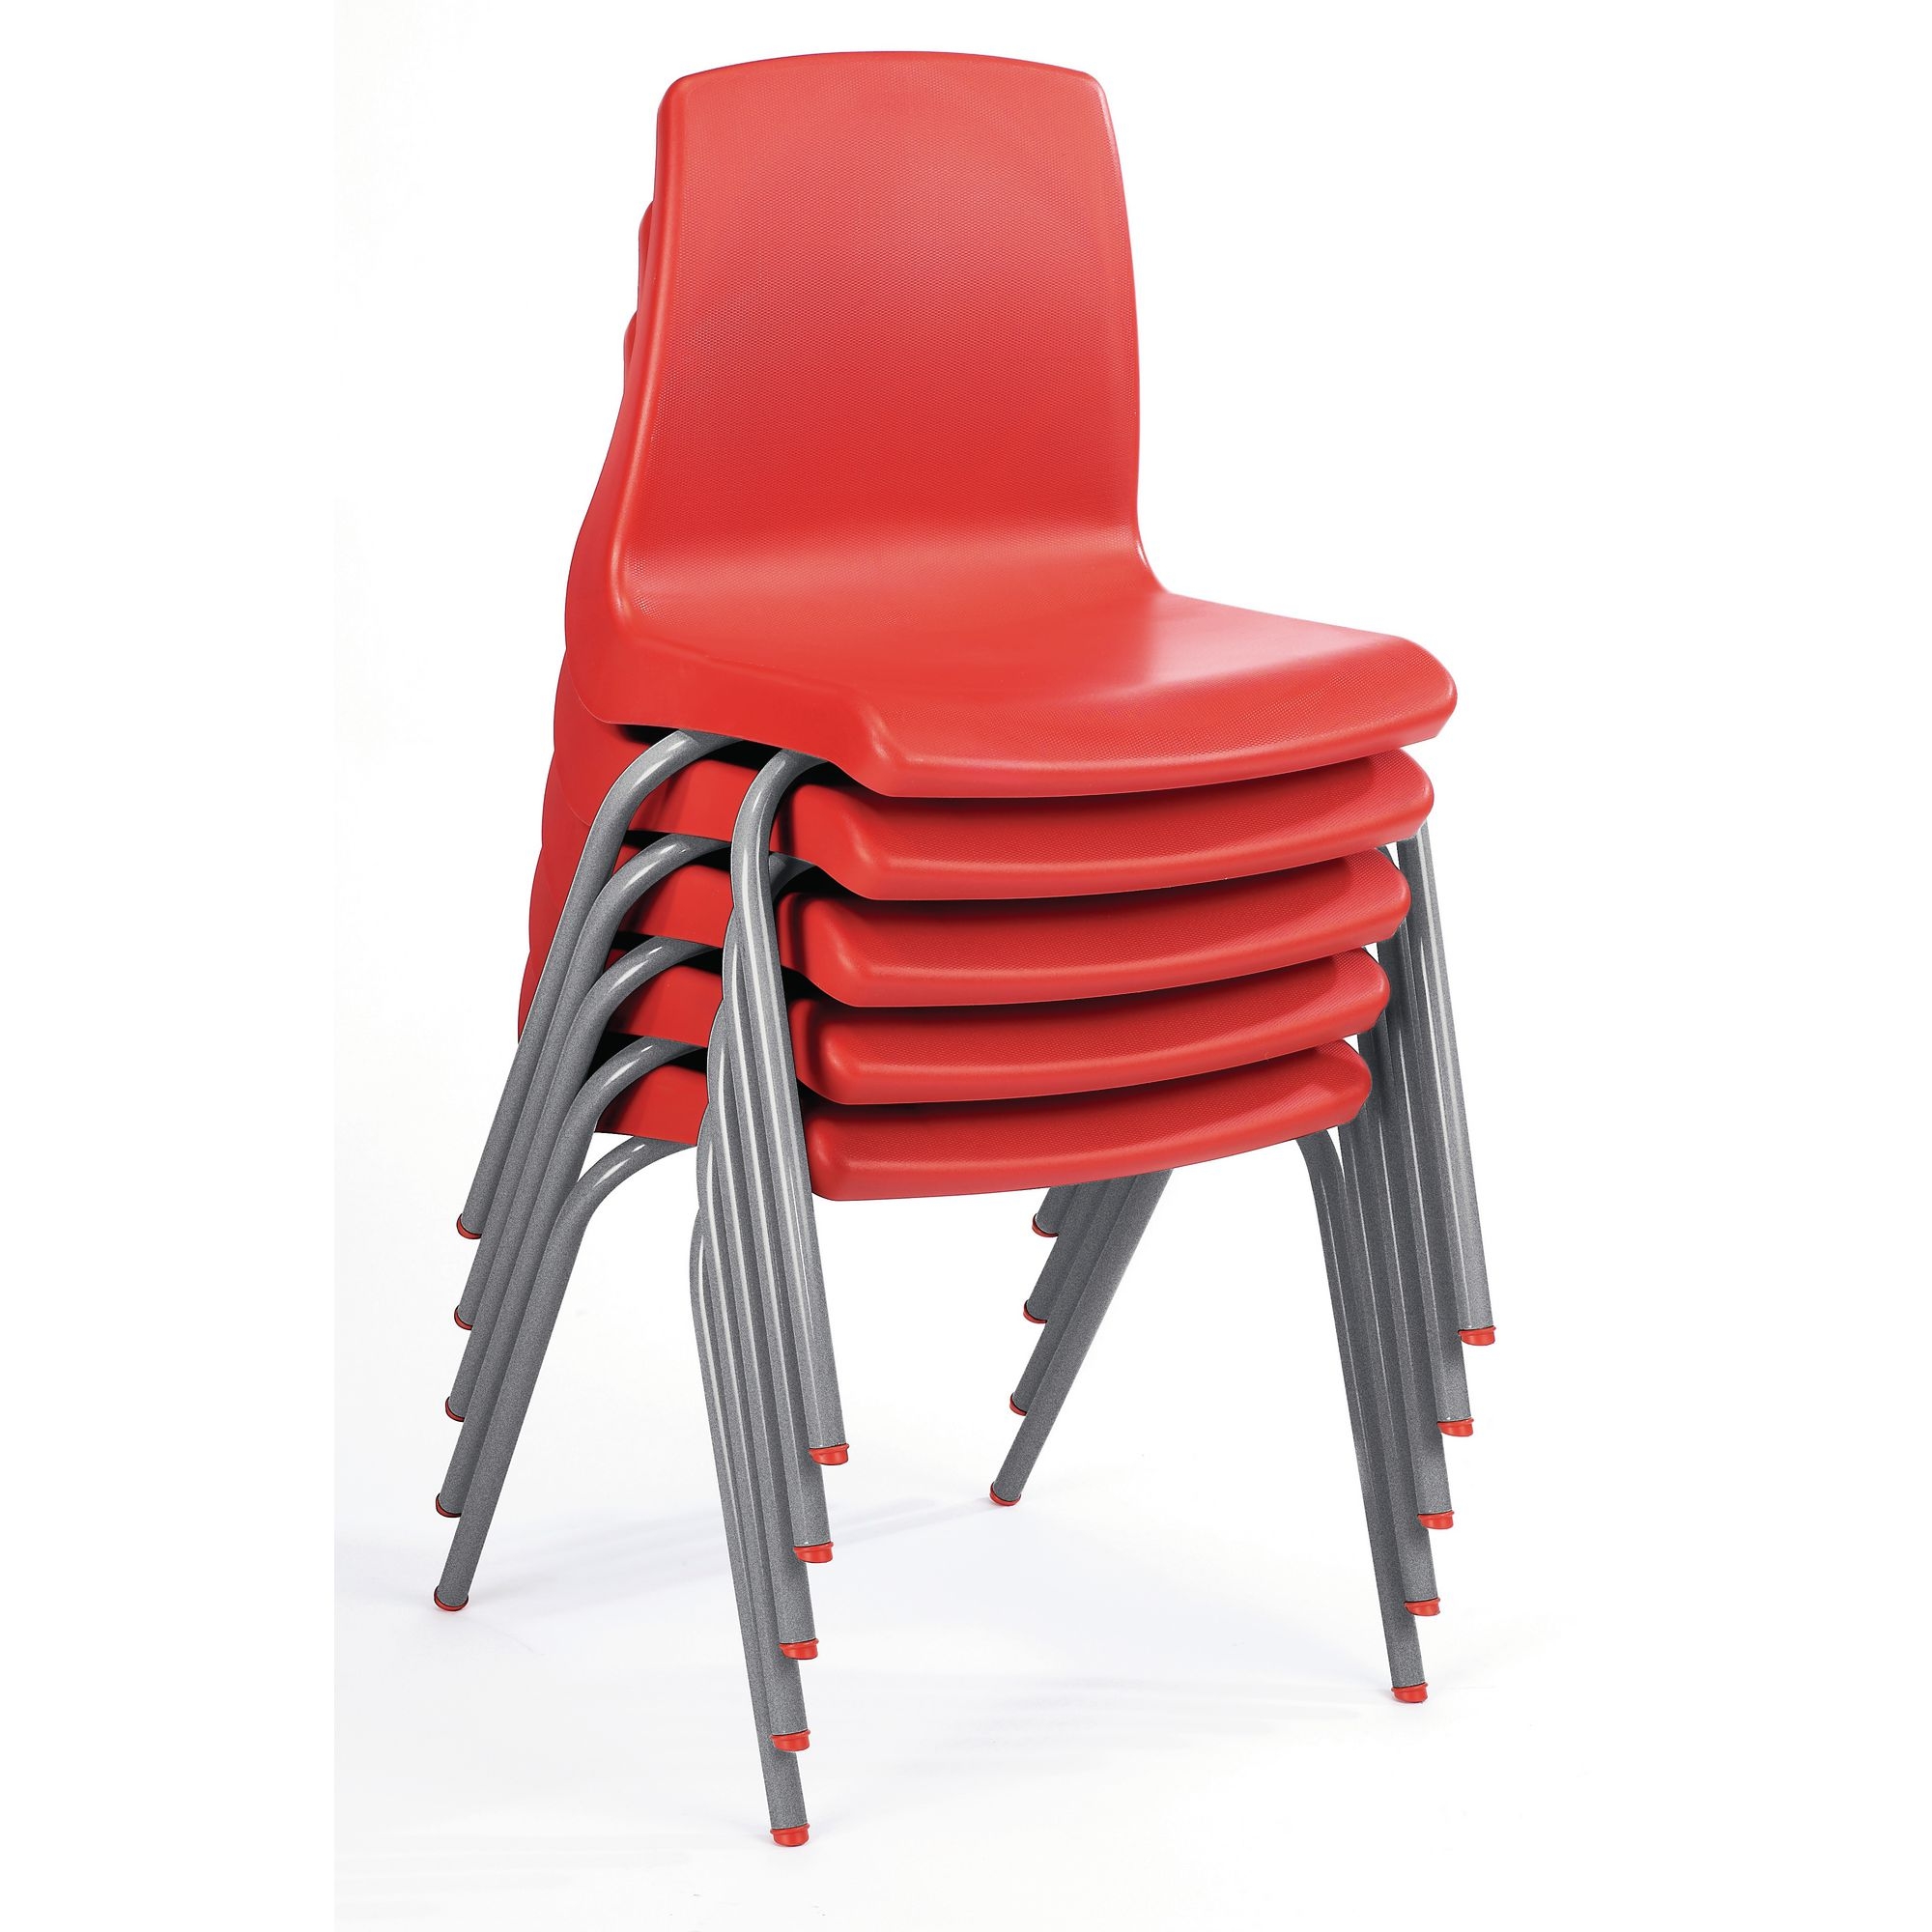 NP Chair Class Pack - Seat height: 430mm - Age 11-14 -Red